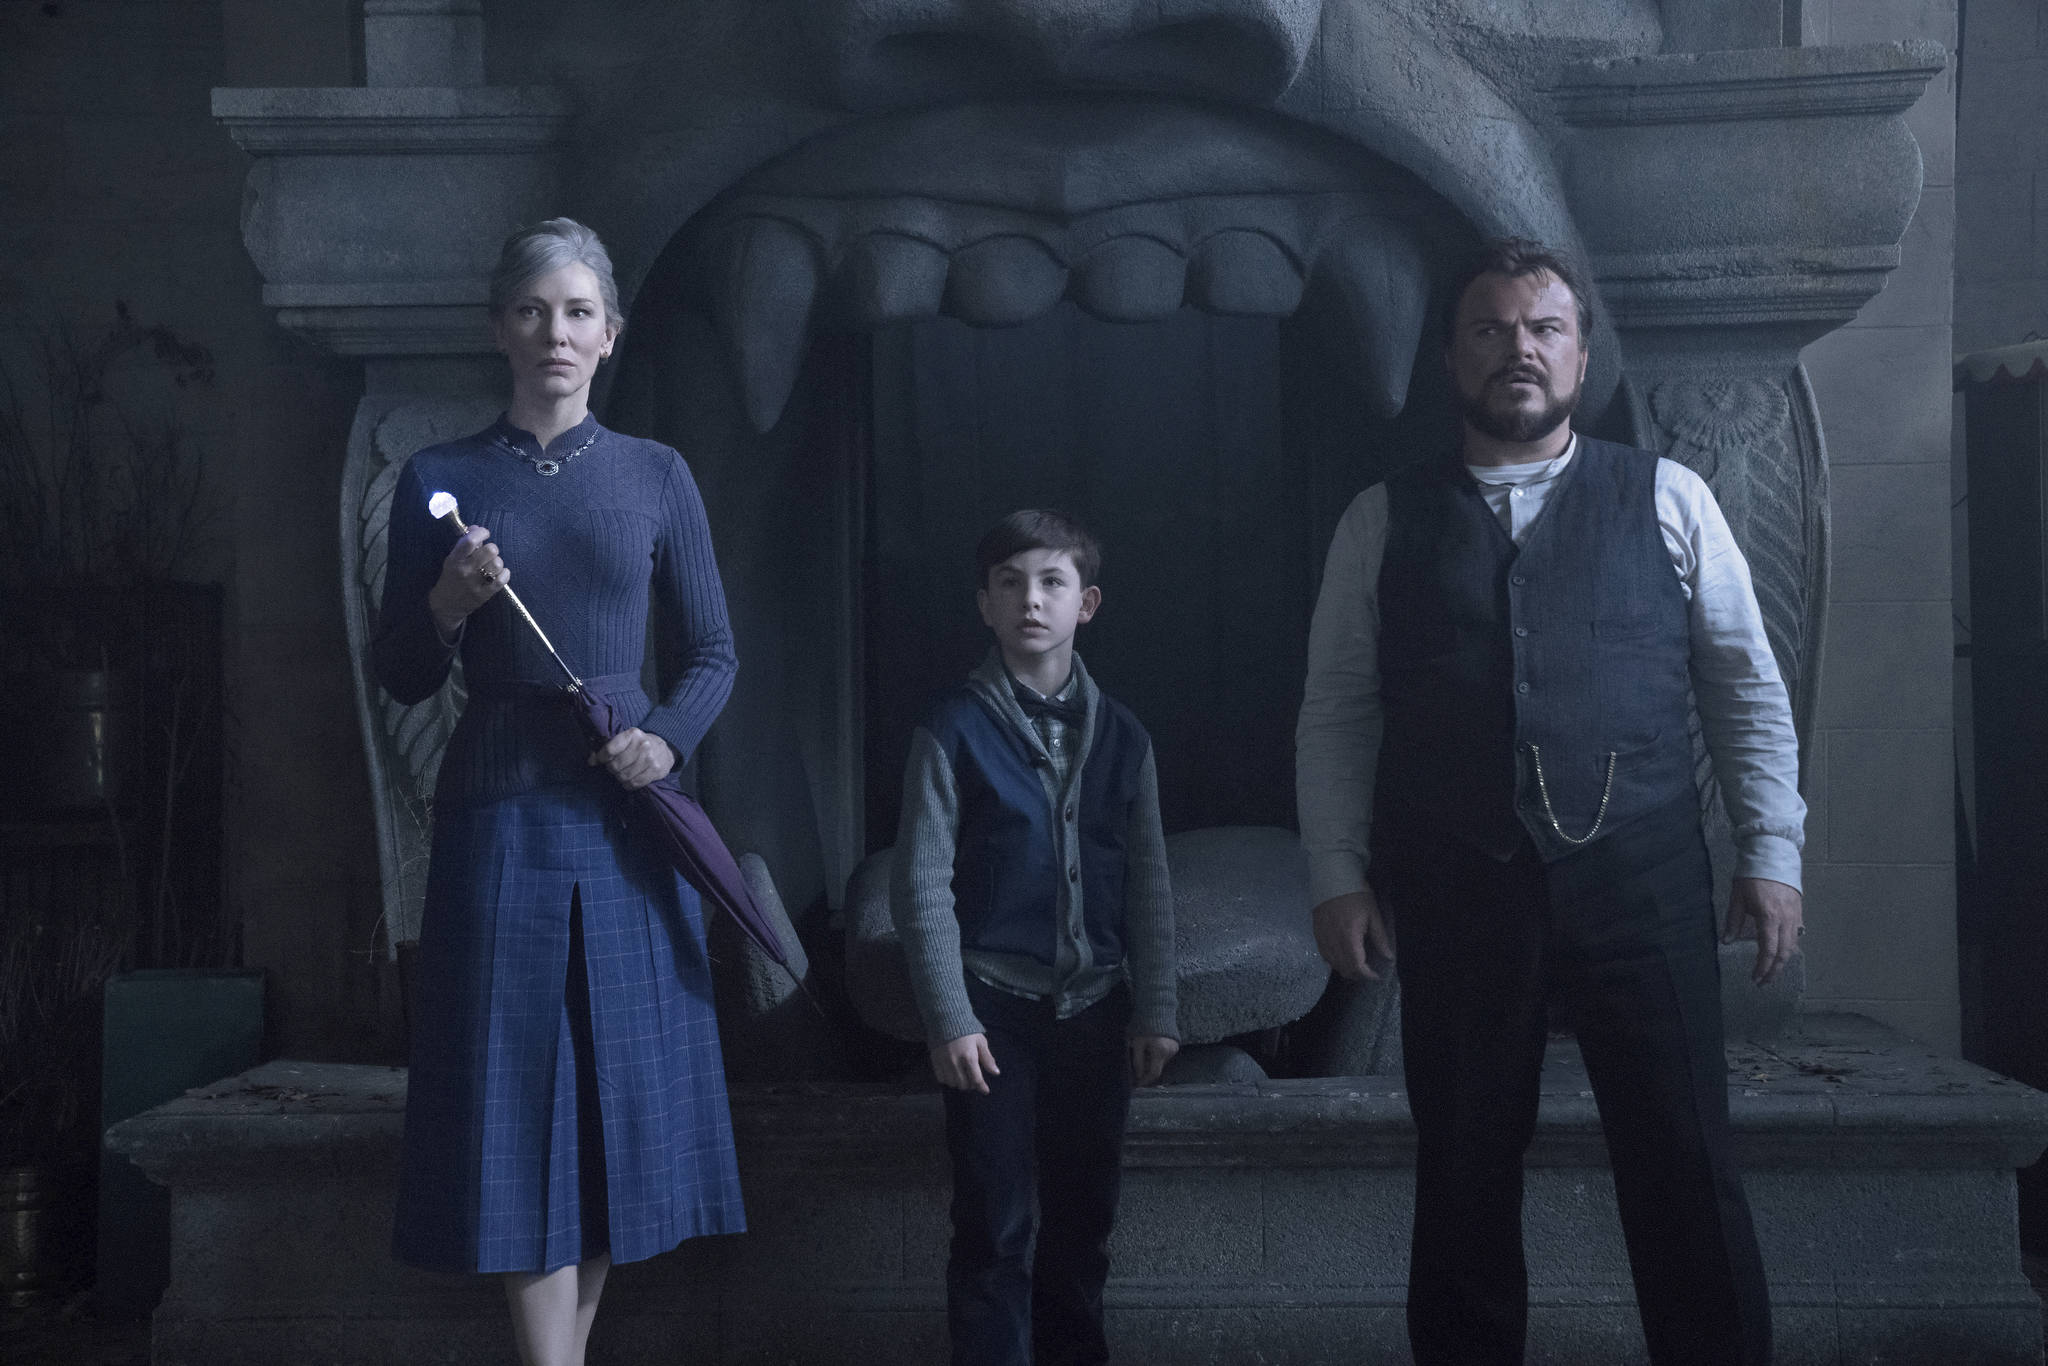 Cate Blanchett, Owen Vaccaro, and Jack Black get their kiddie horror on in The House 
With a Clock in Its Walls. Photo courtesy Storyteller Distribution Co.